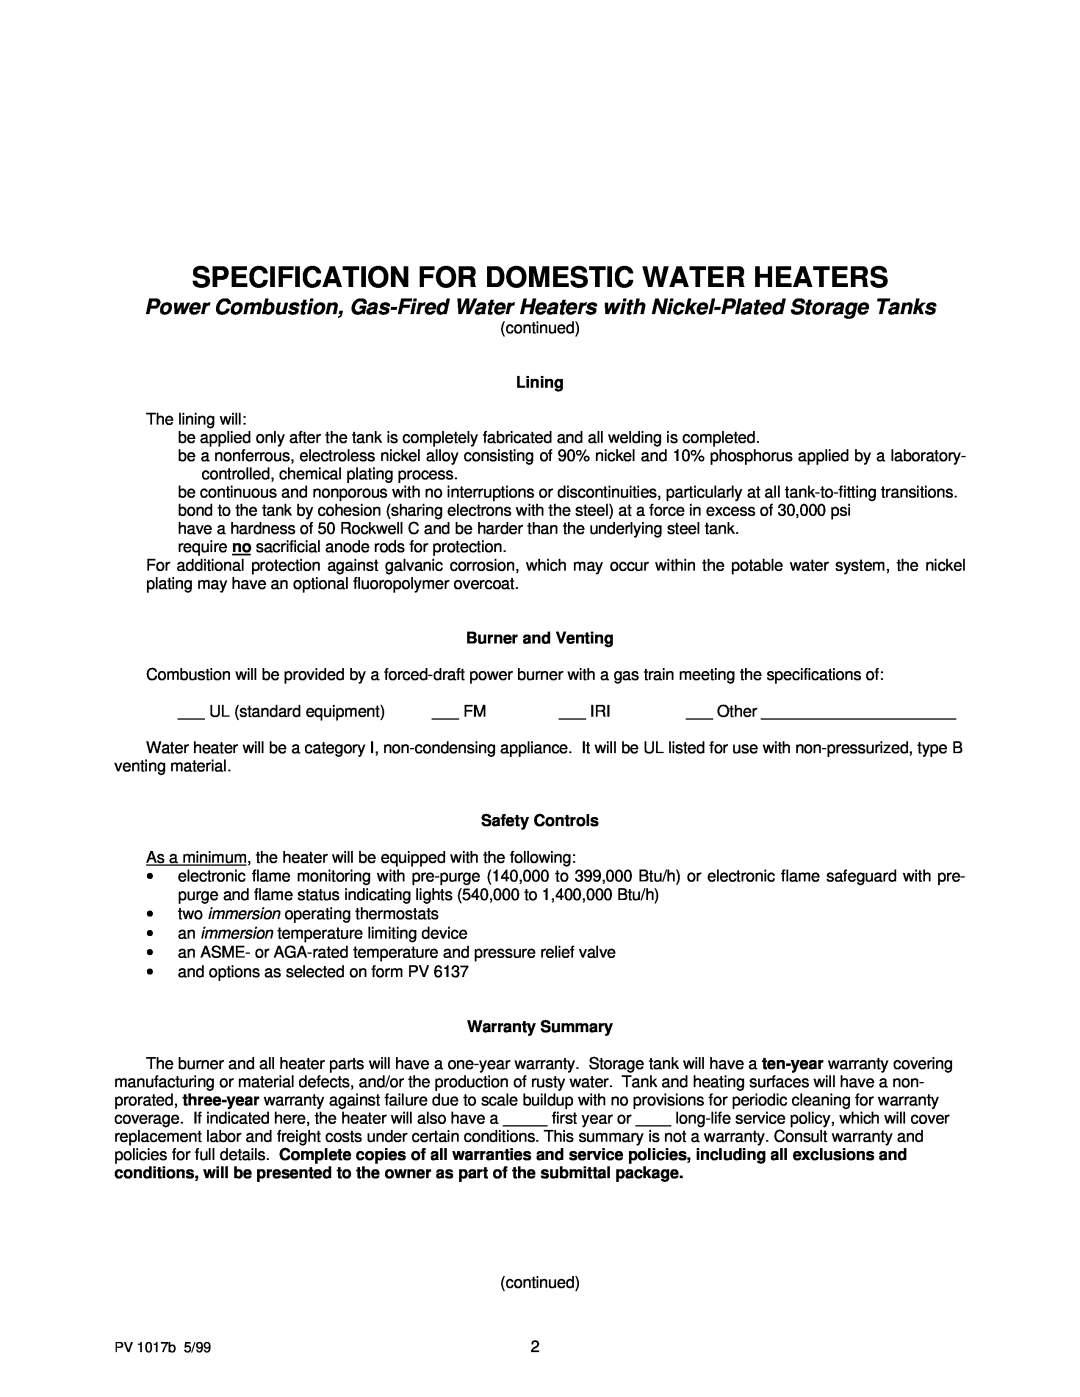 PVI Industries Specification For Domestic Water Heaters, Lining, Burner and Venting, Safety Controls, Warranty Summary 